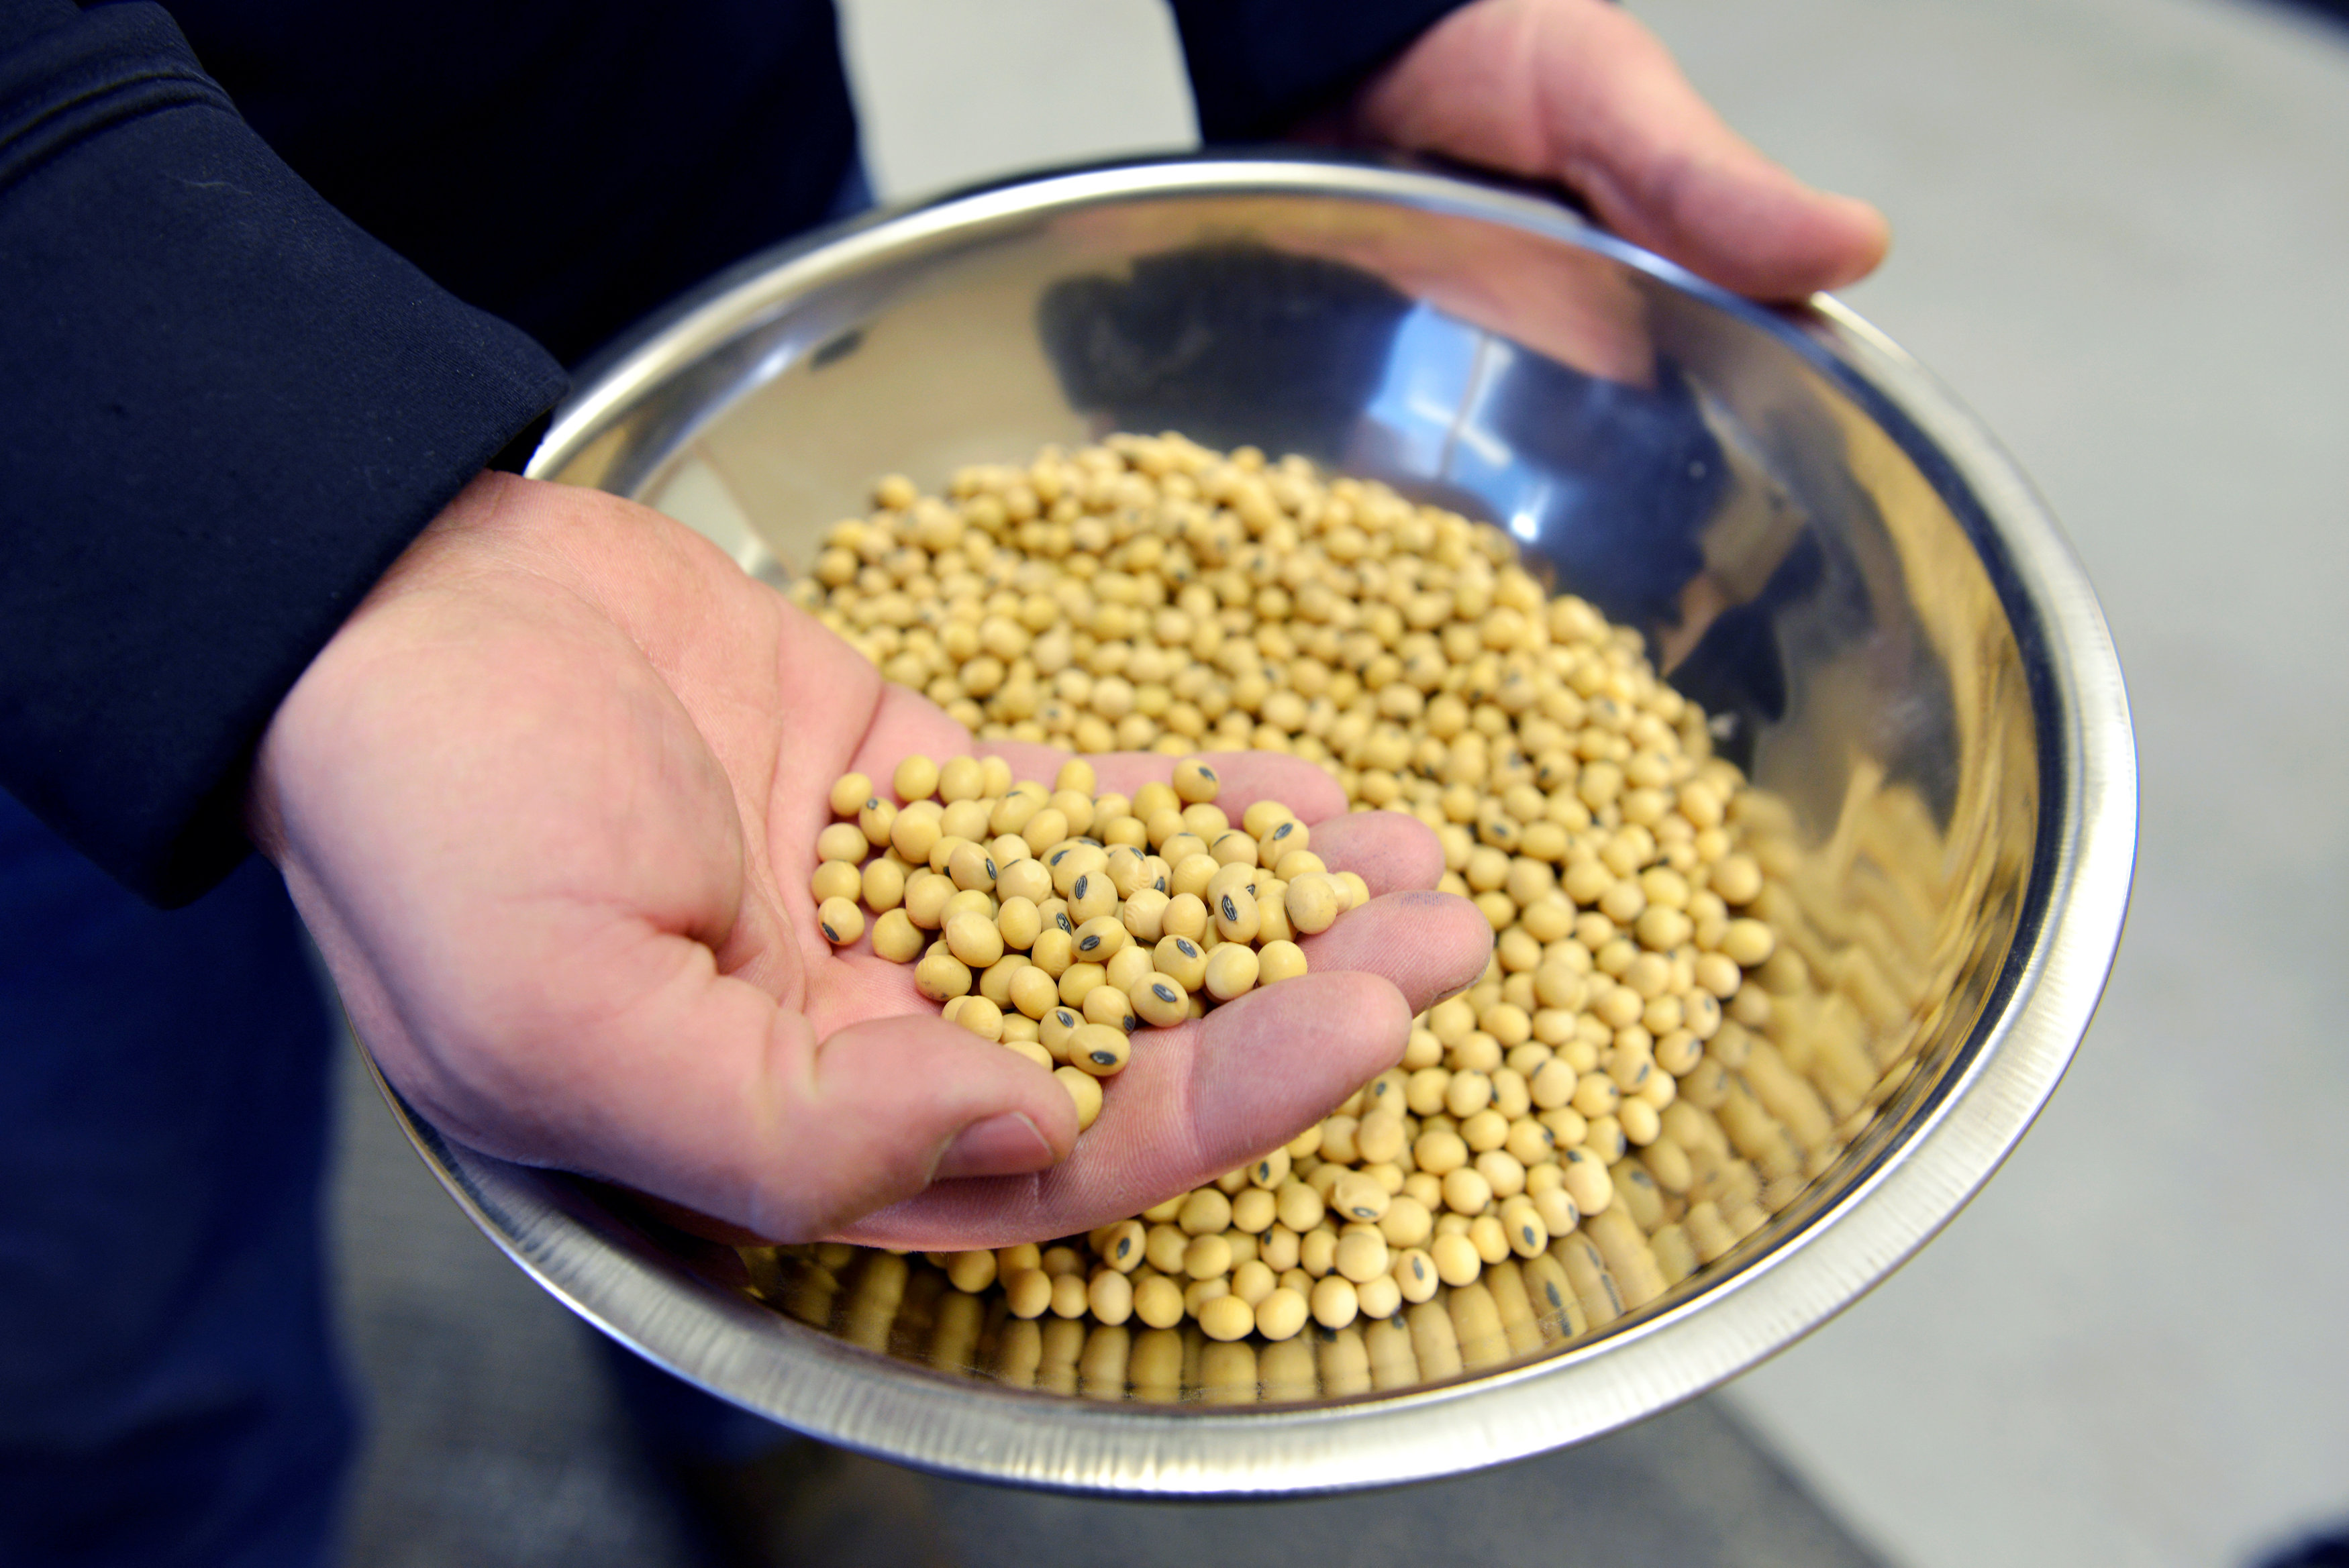 A sample of clean, processed soybeans at Peterson Farms Seed facility in Fargo, North Dakota, U.S., December 6, 2017. Photo taken December 6, 2017.